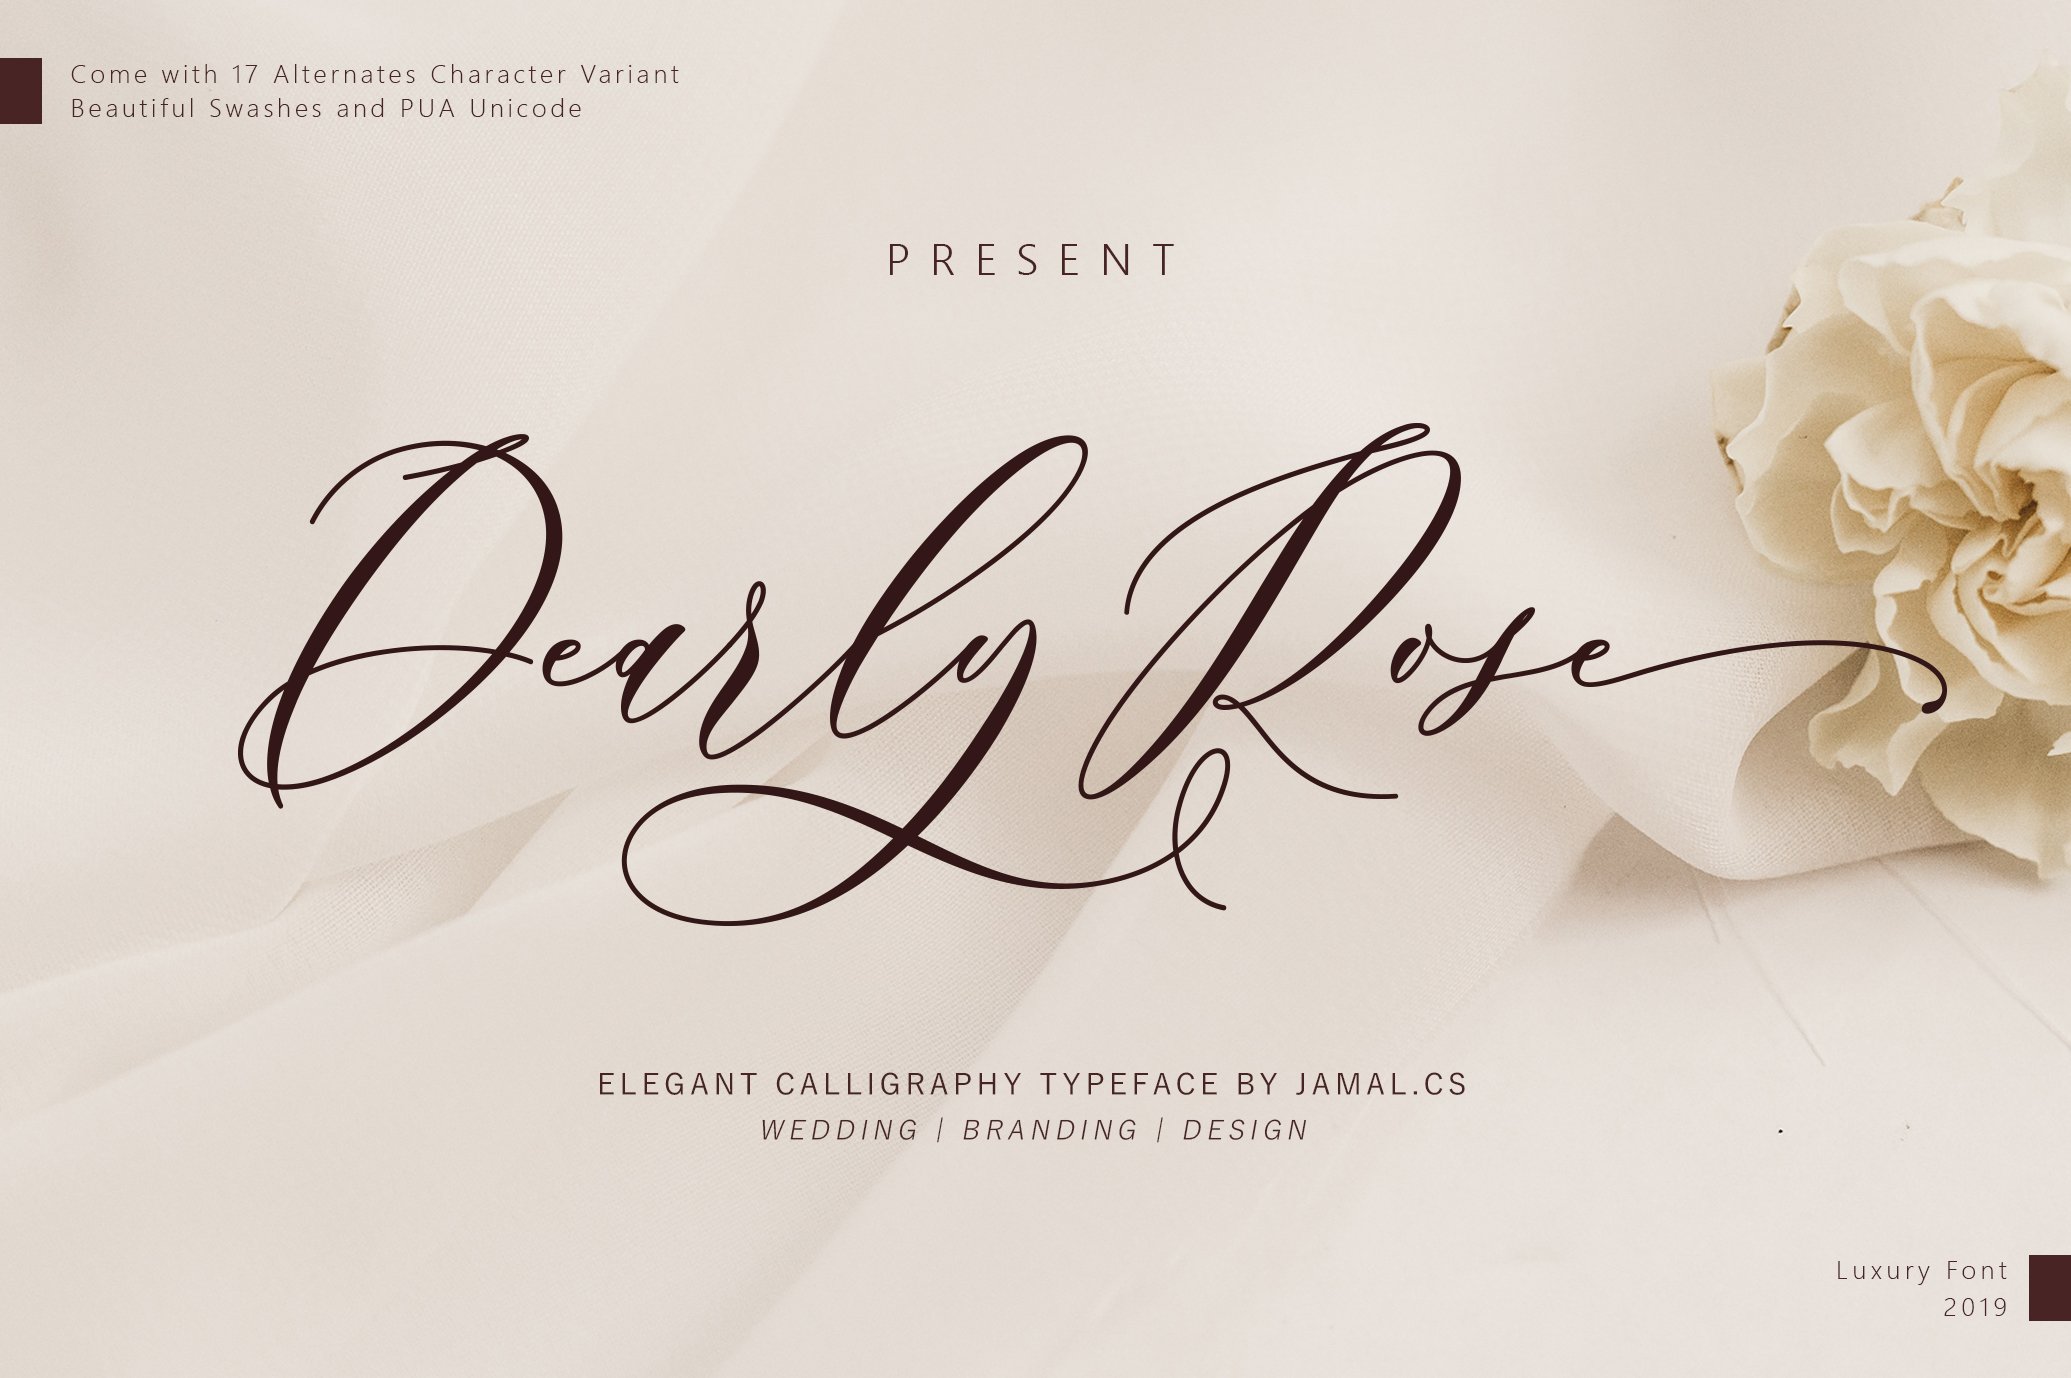 Dearly Rose cover image.